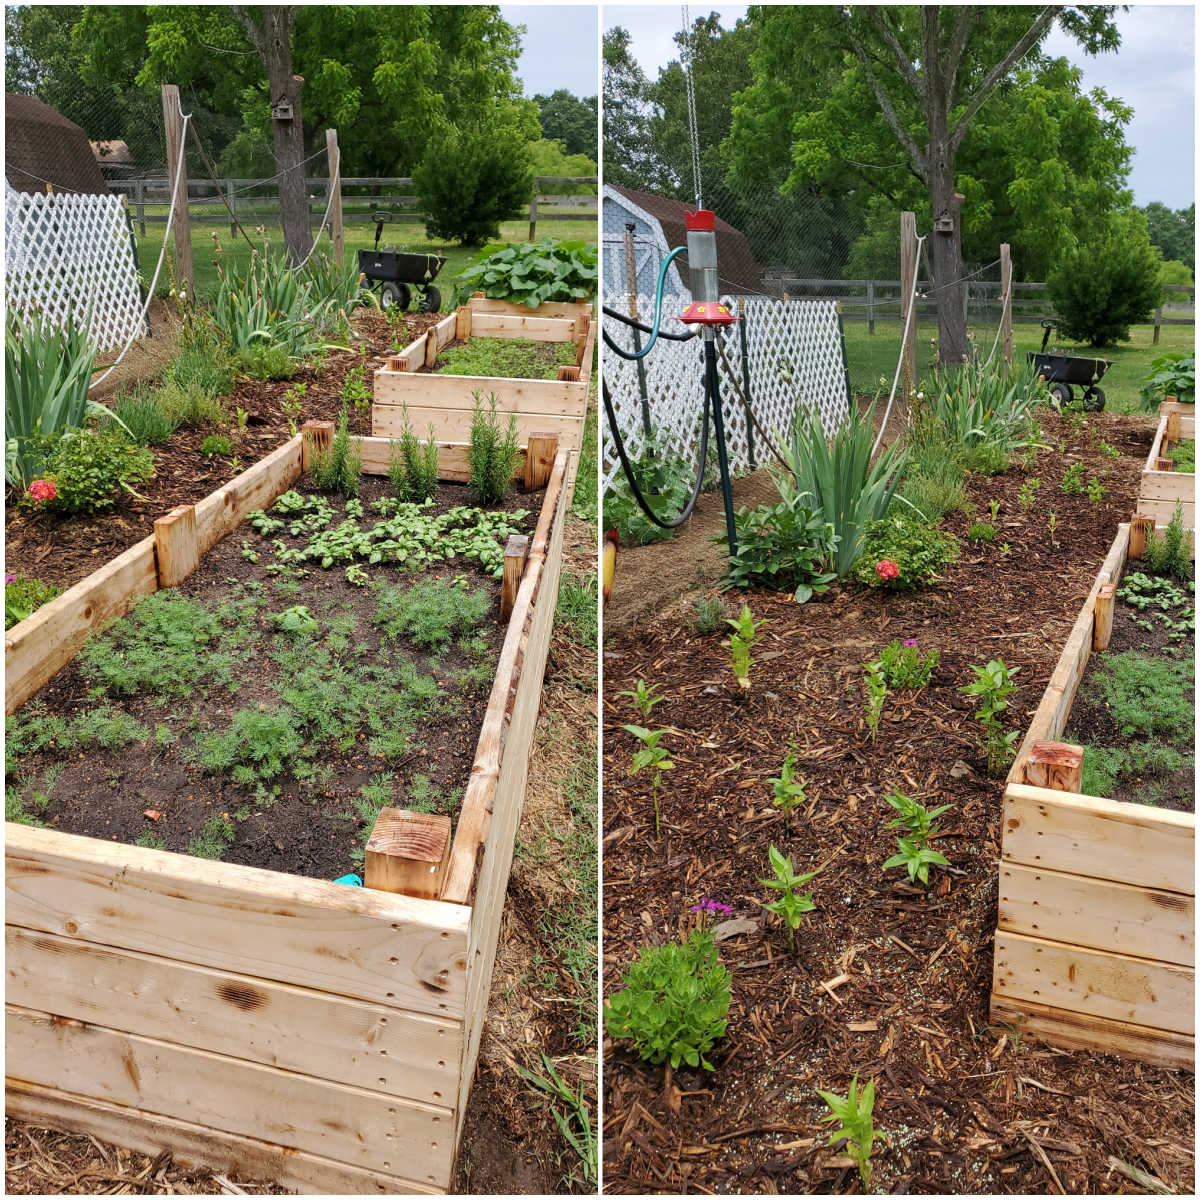 Inexpensive raised garden beds next to vegetable garden filled with herbs and squash.